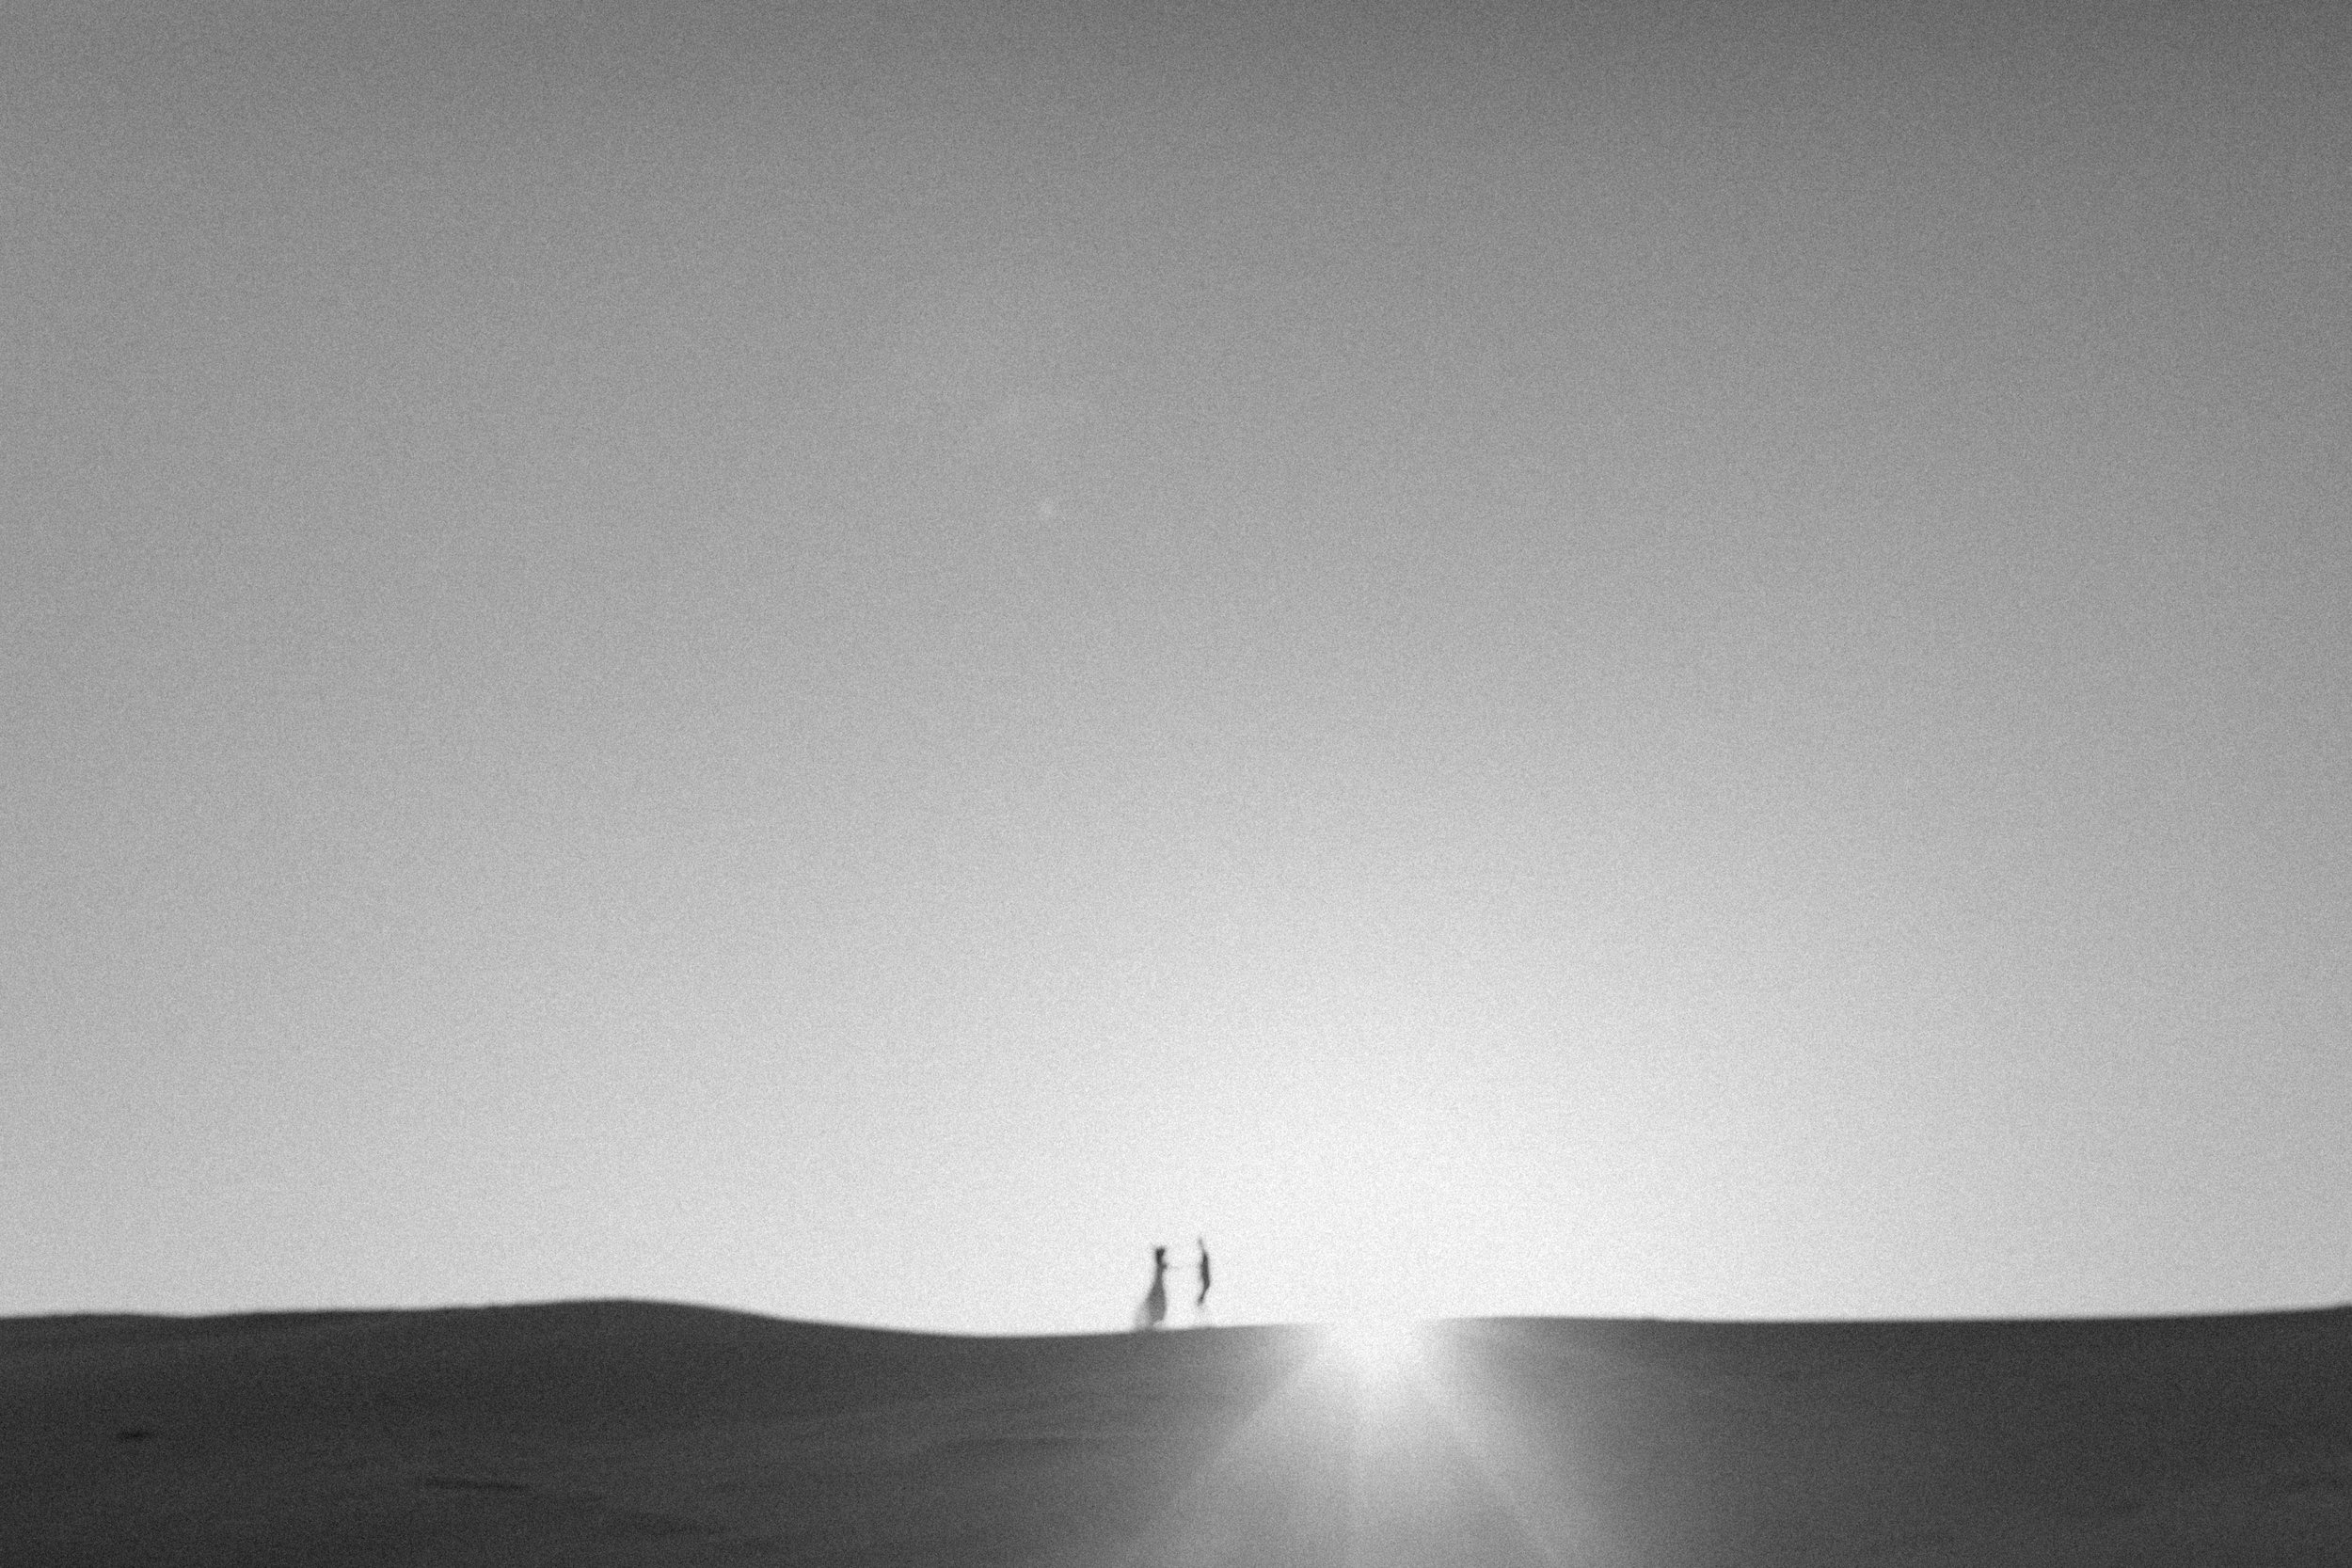 Dancing in front of the sunset on the dunes in black and white